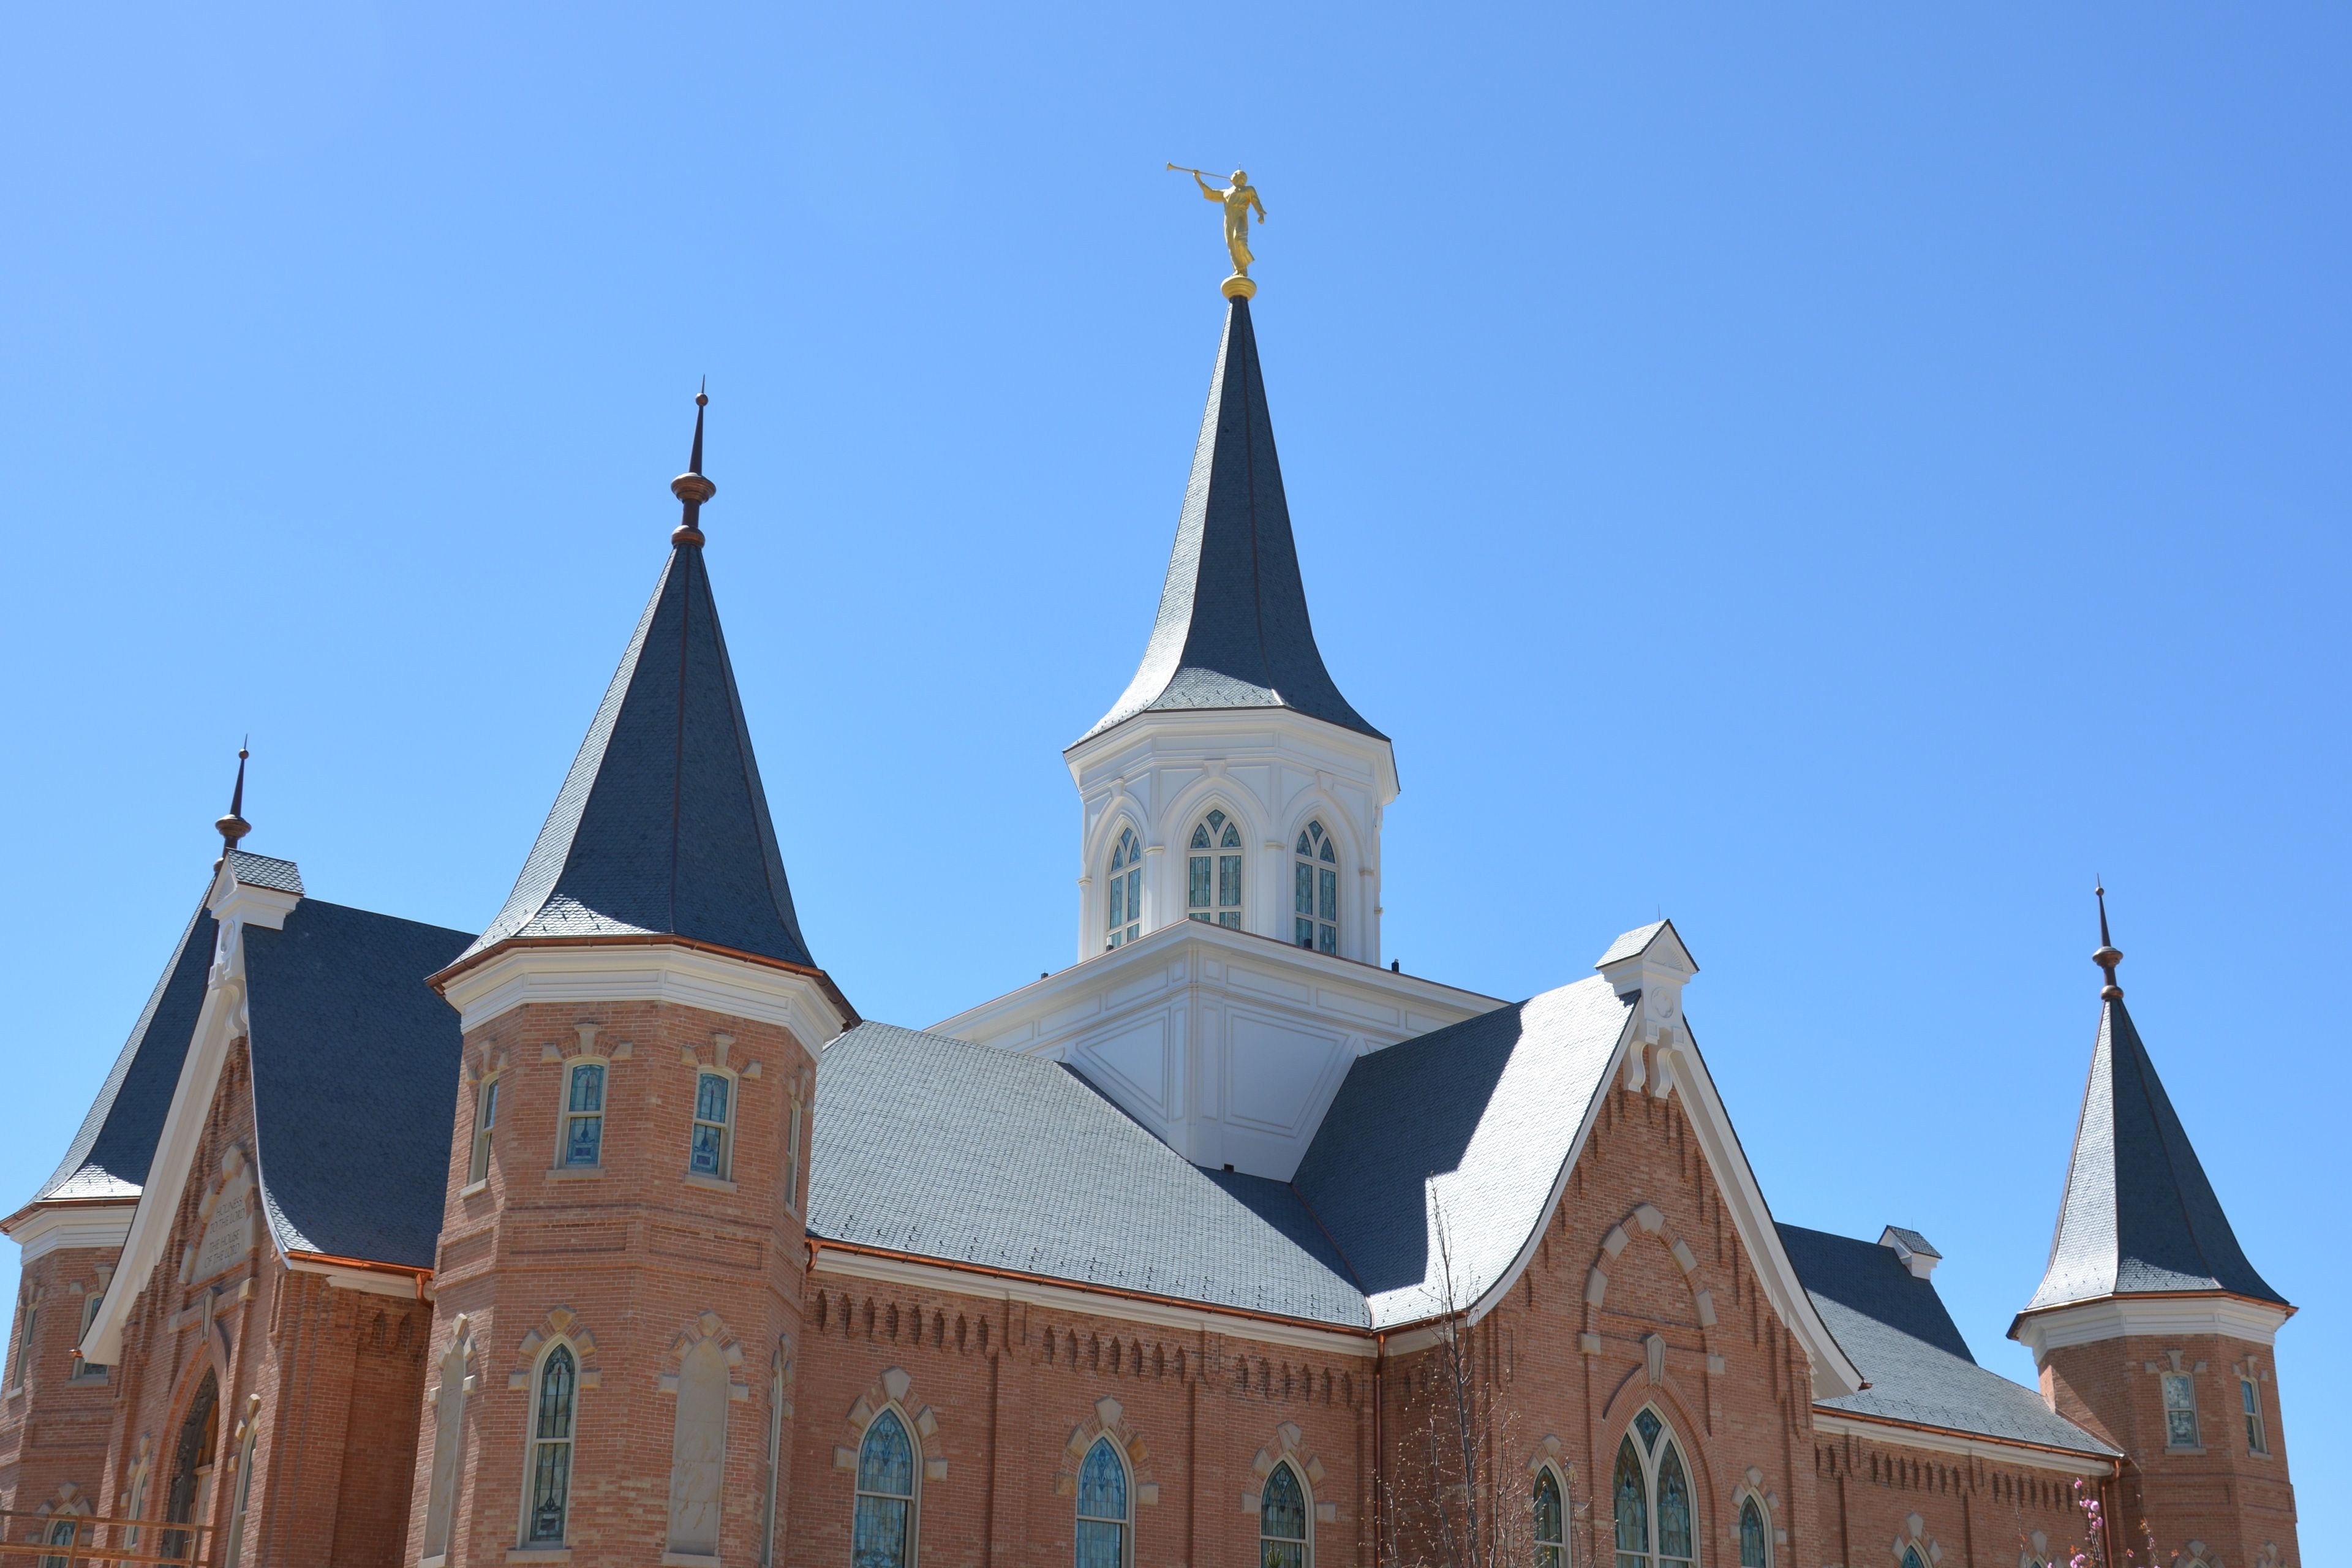 A side view of the Provo City Center Temple with a clear sky overhead.